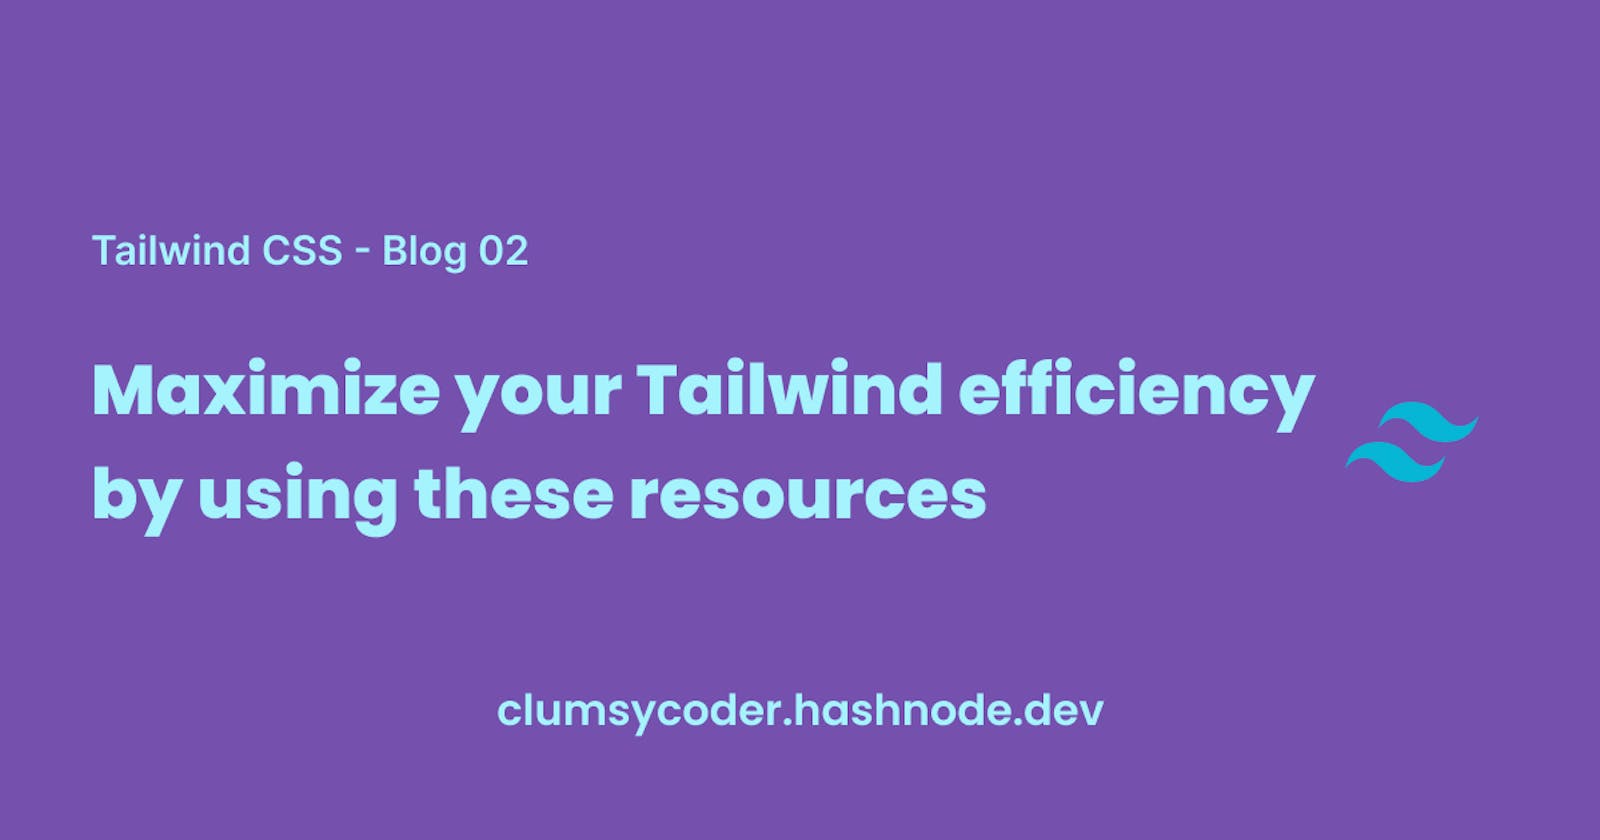 Maximize your Tailwind efficiency by using these resources